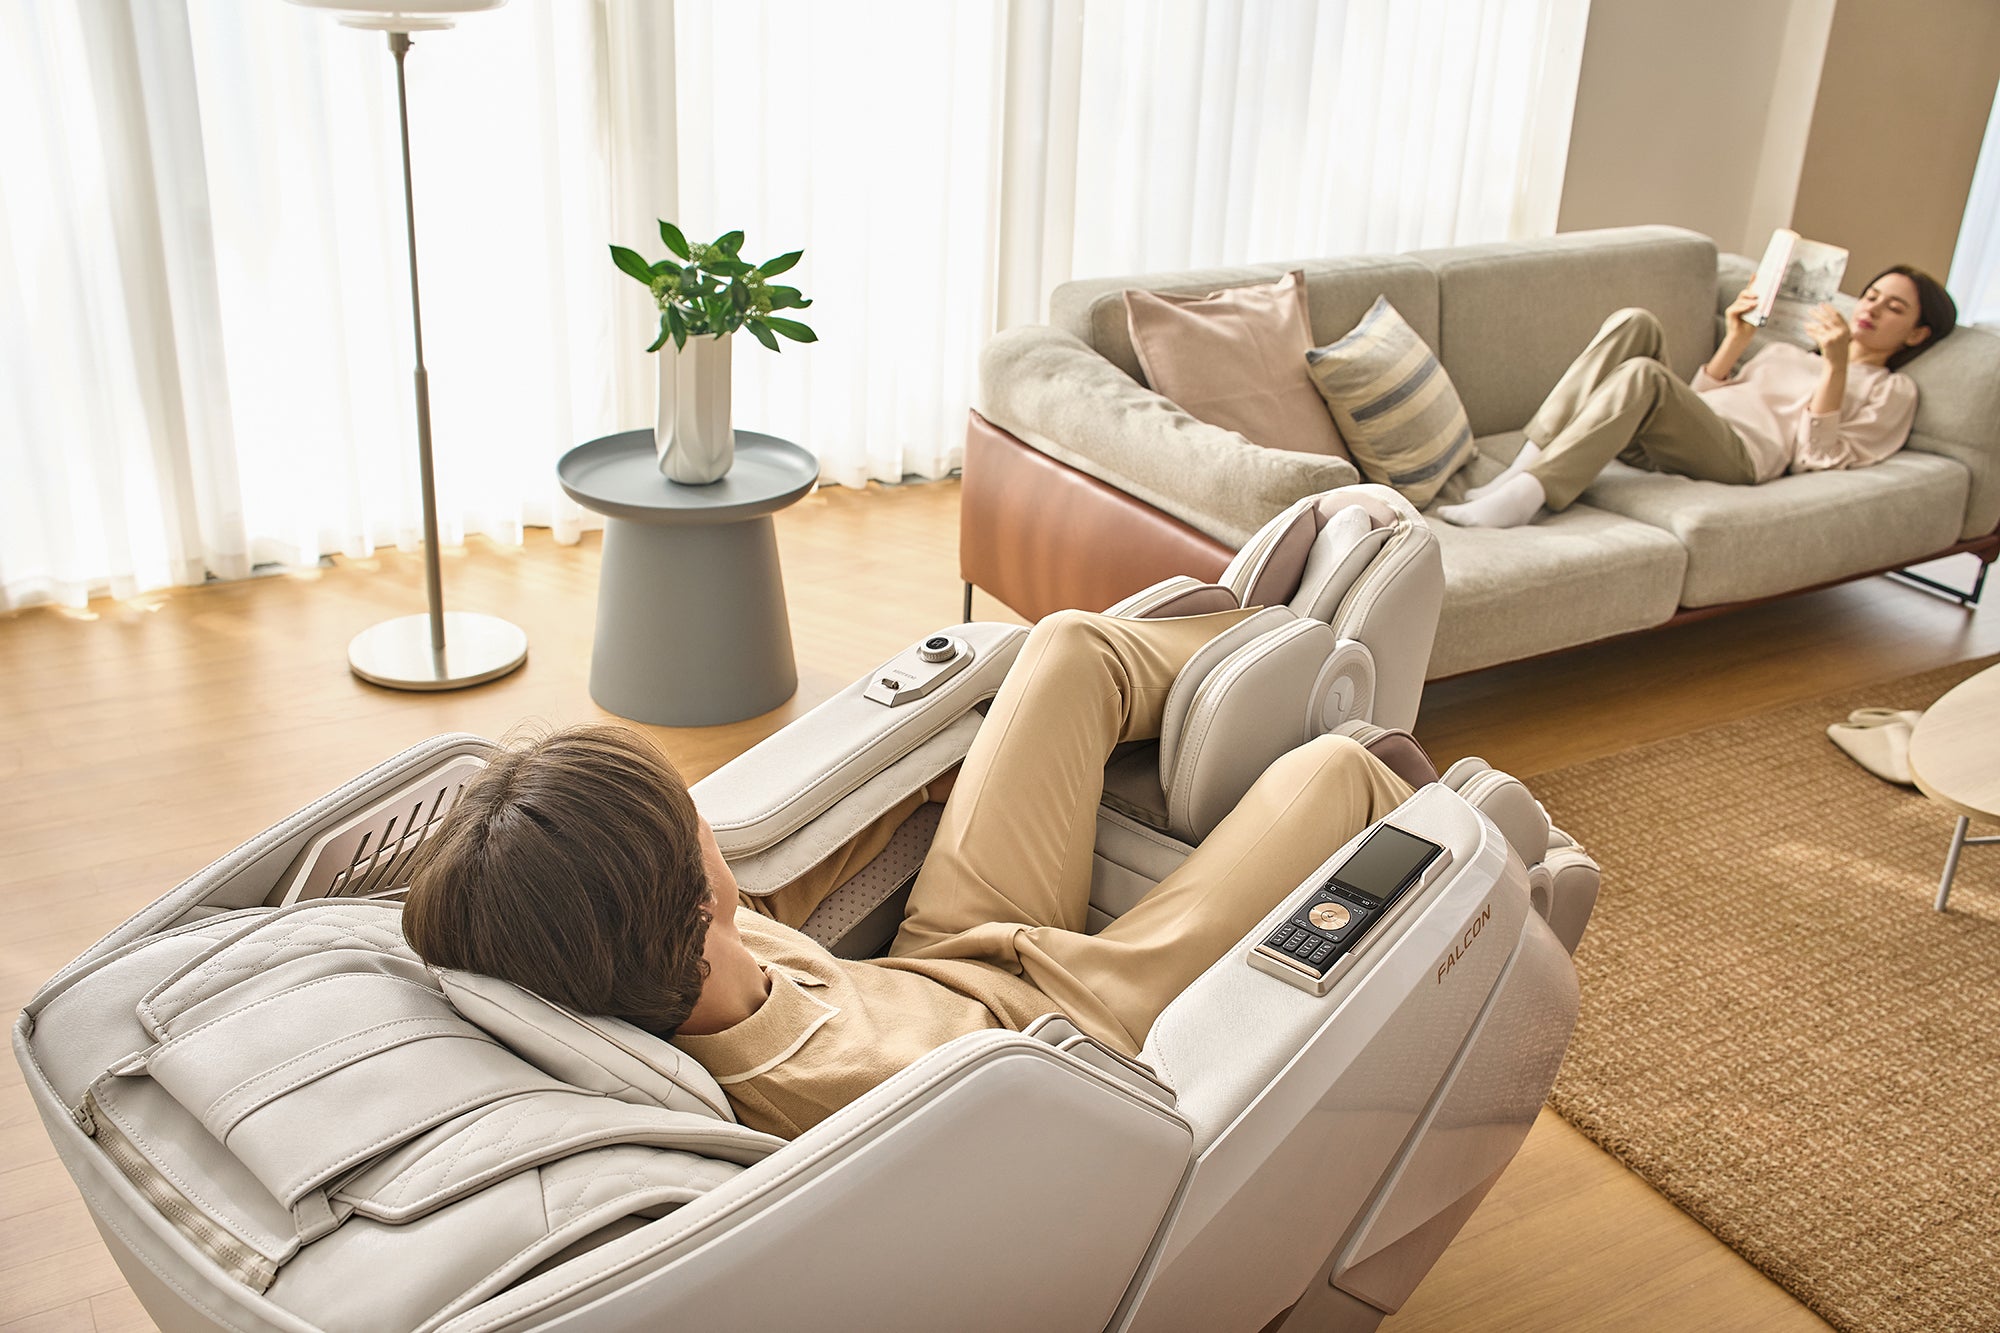 A picture of the Falcon massage chair in a modern living room.